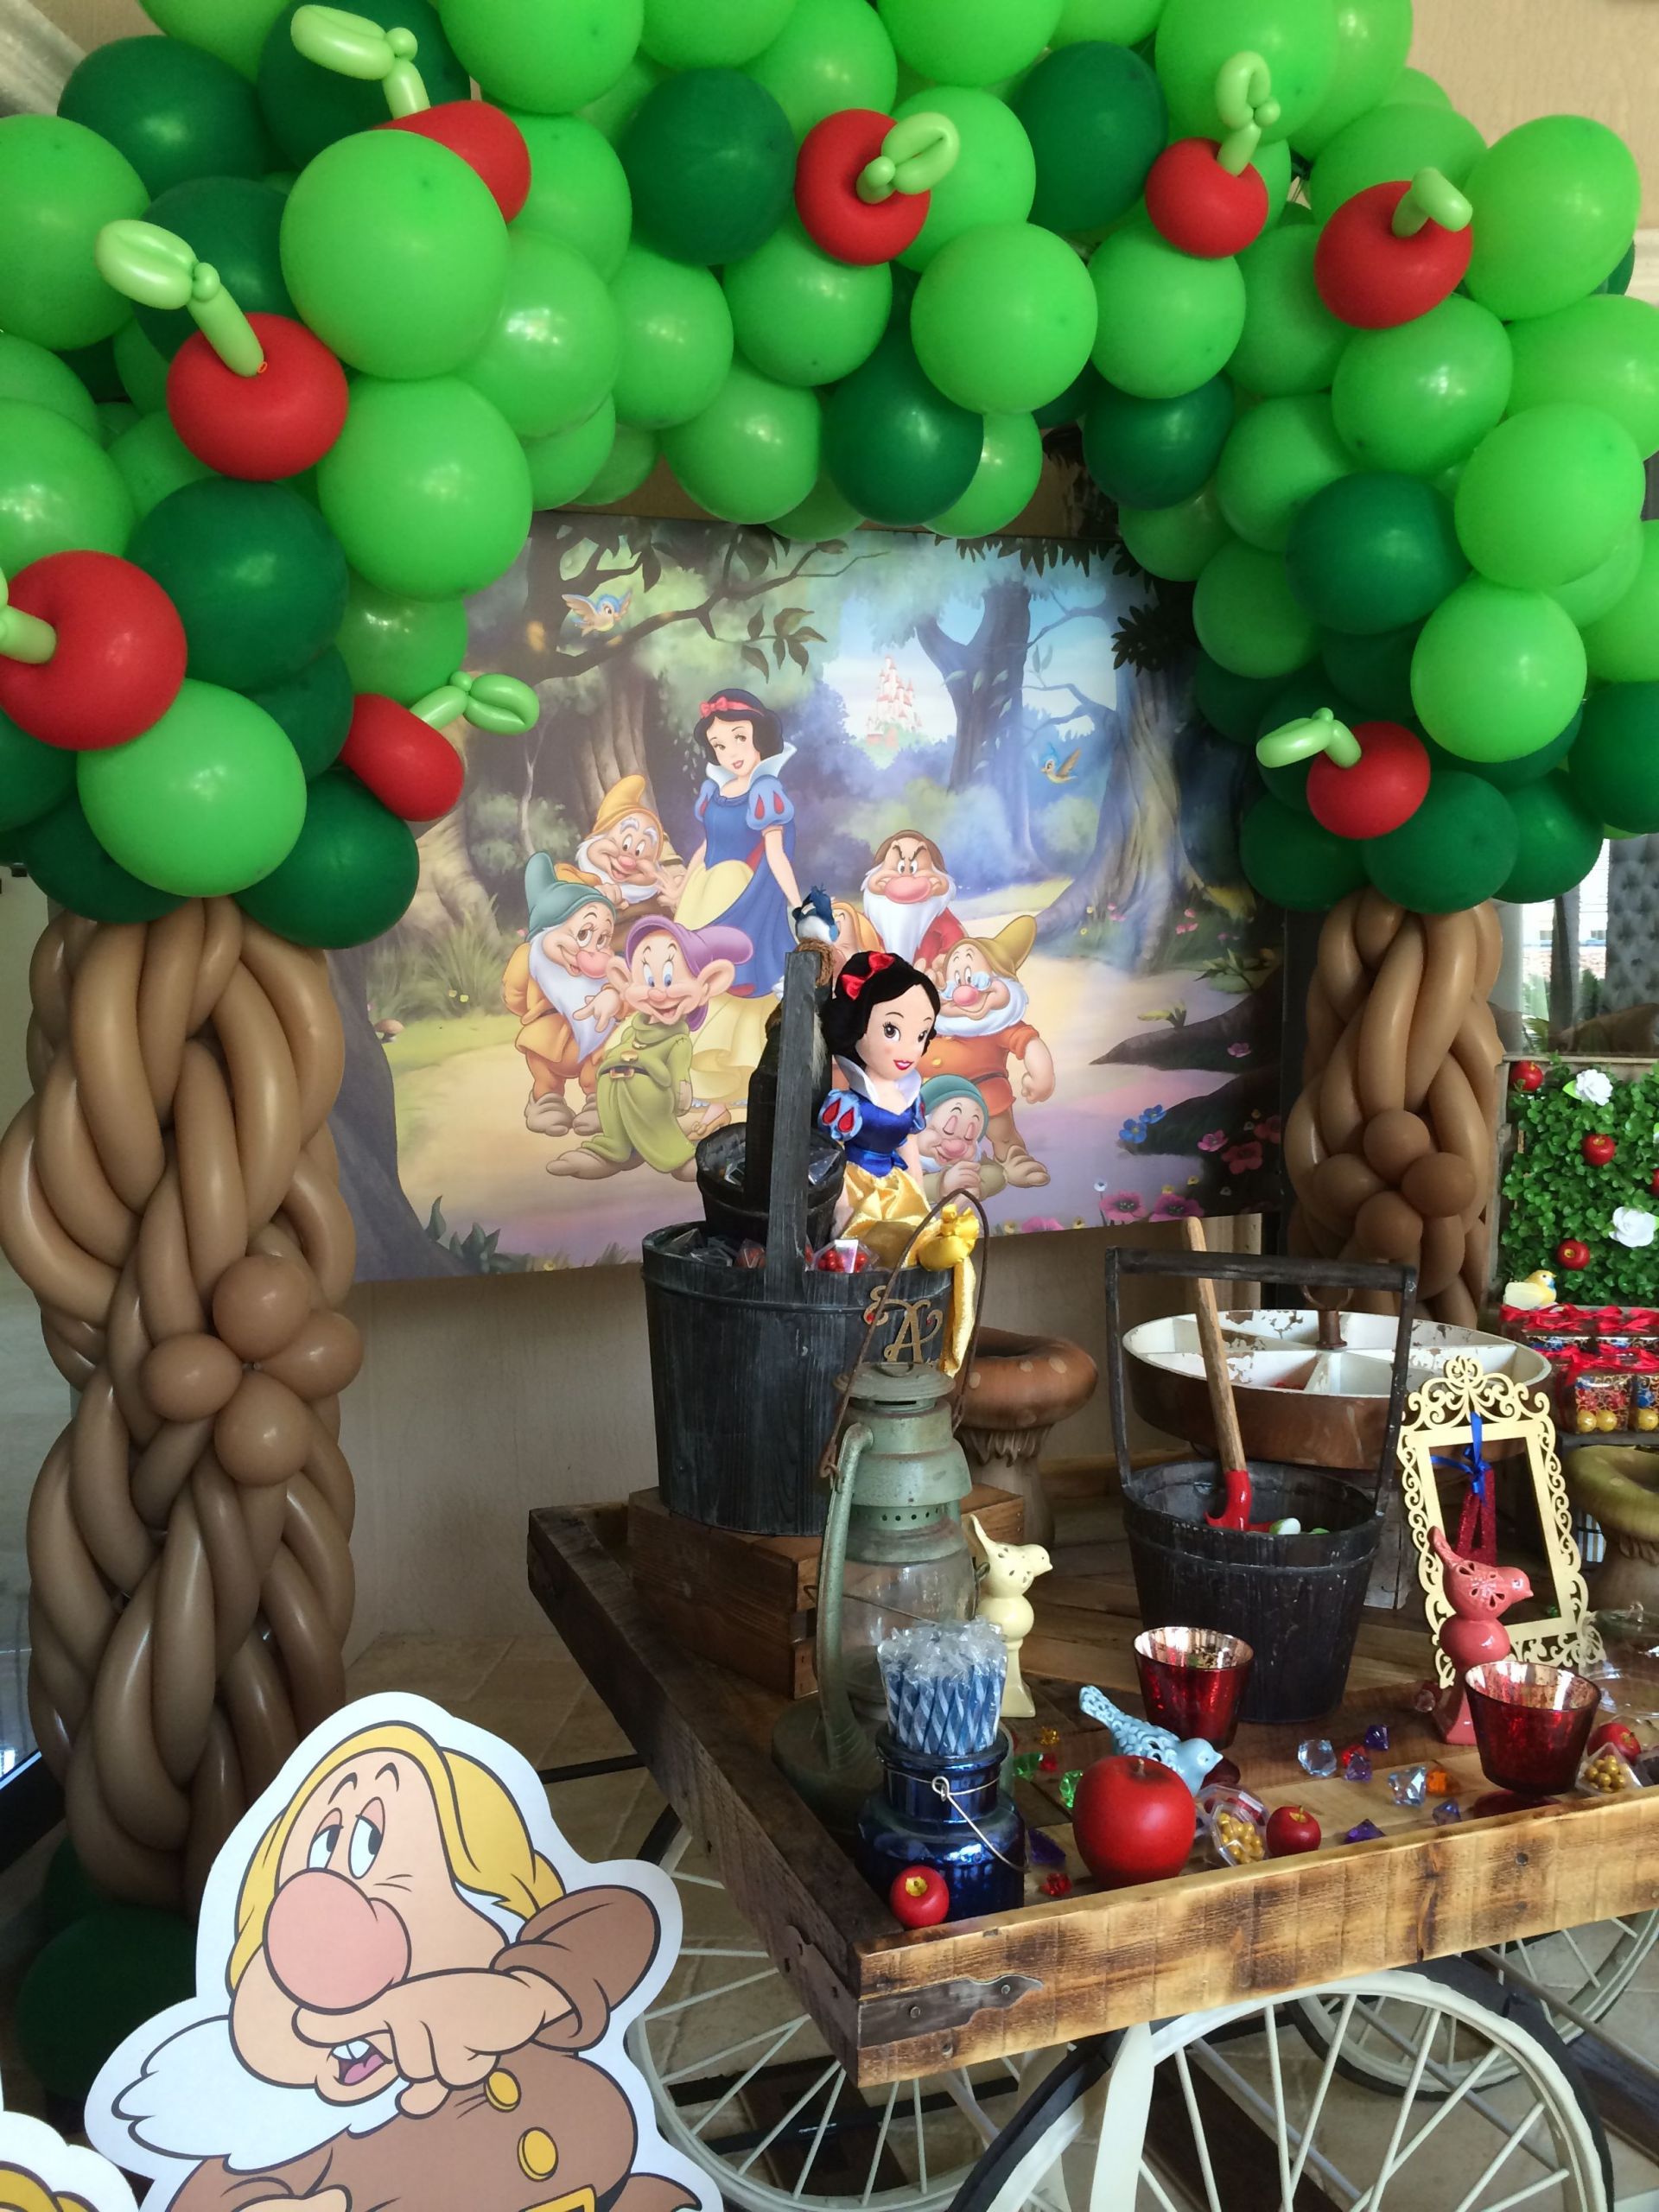 Snow White Birthday Decorations
 Pin by JOAN HAGEDORN on Balloon Trees in 2019